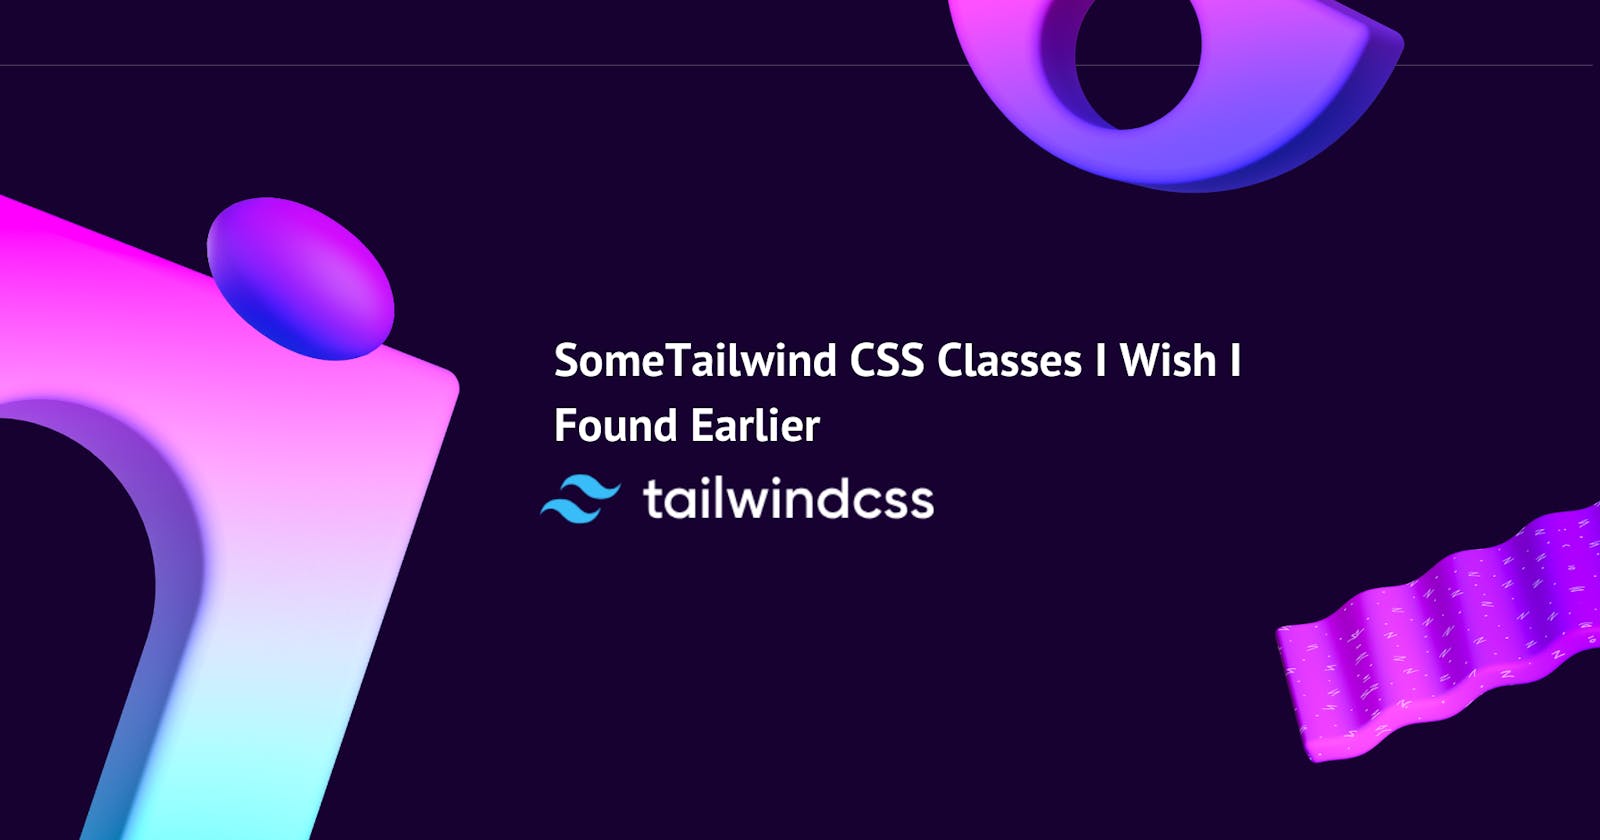 8 Tailwind CSS Classes I Wish I Found Earlier✈️